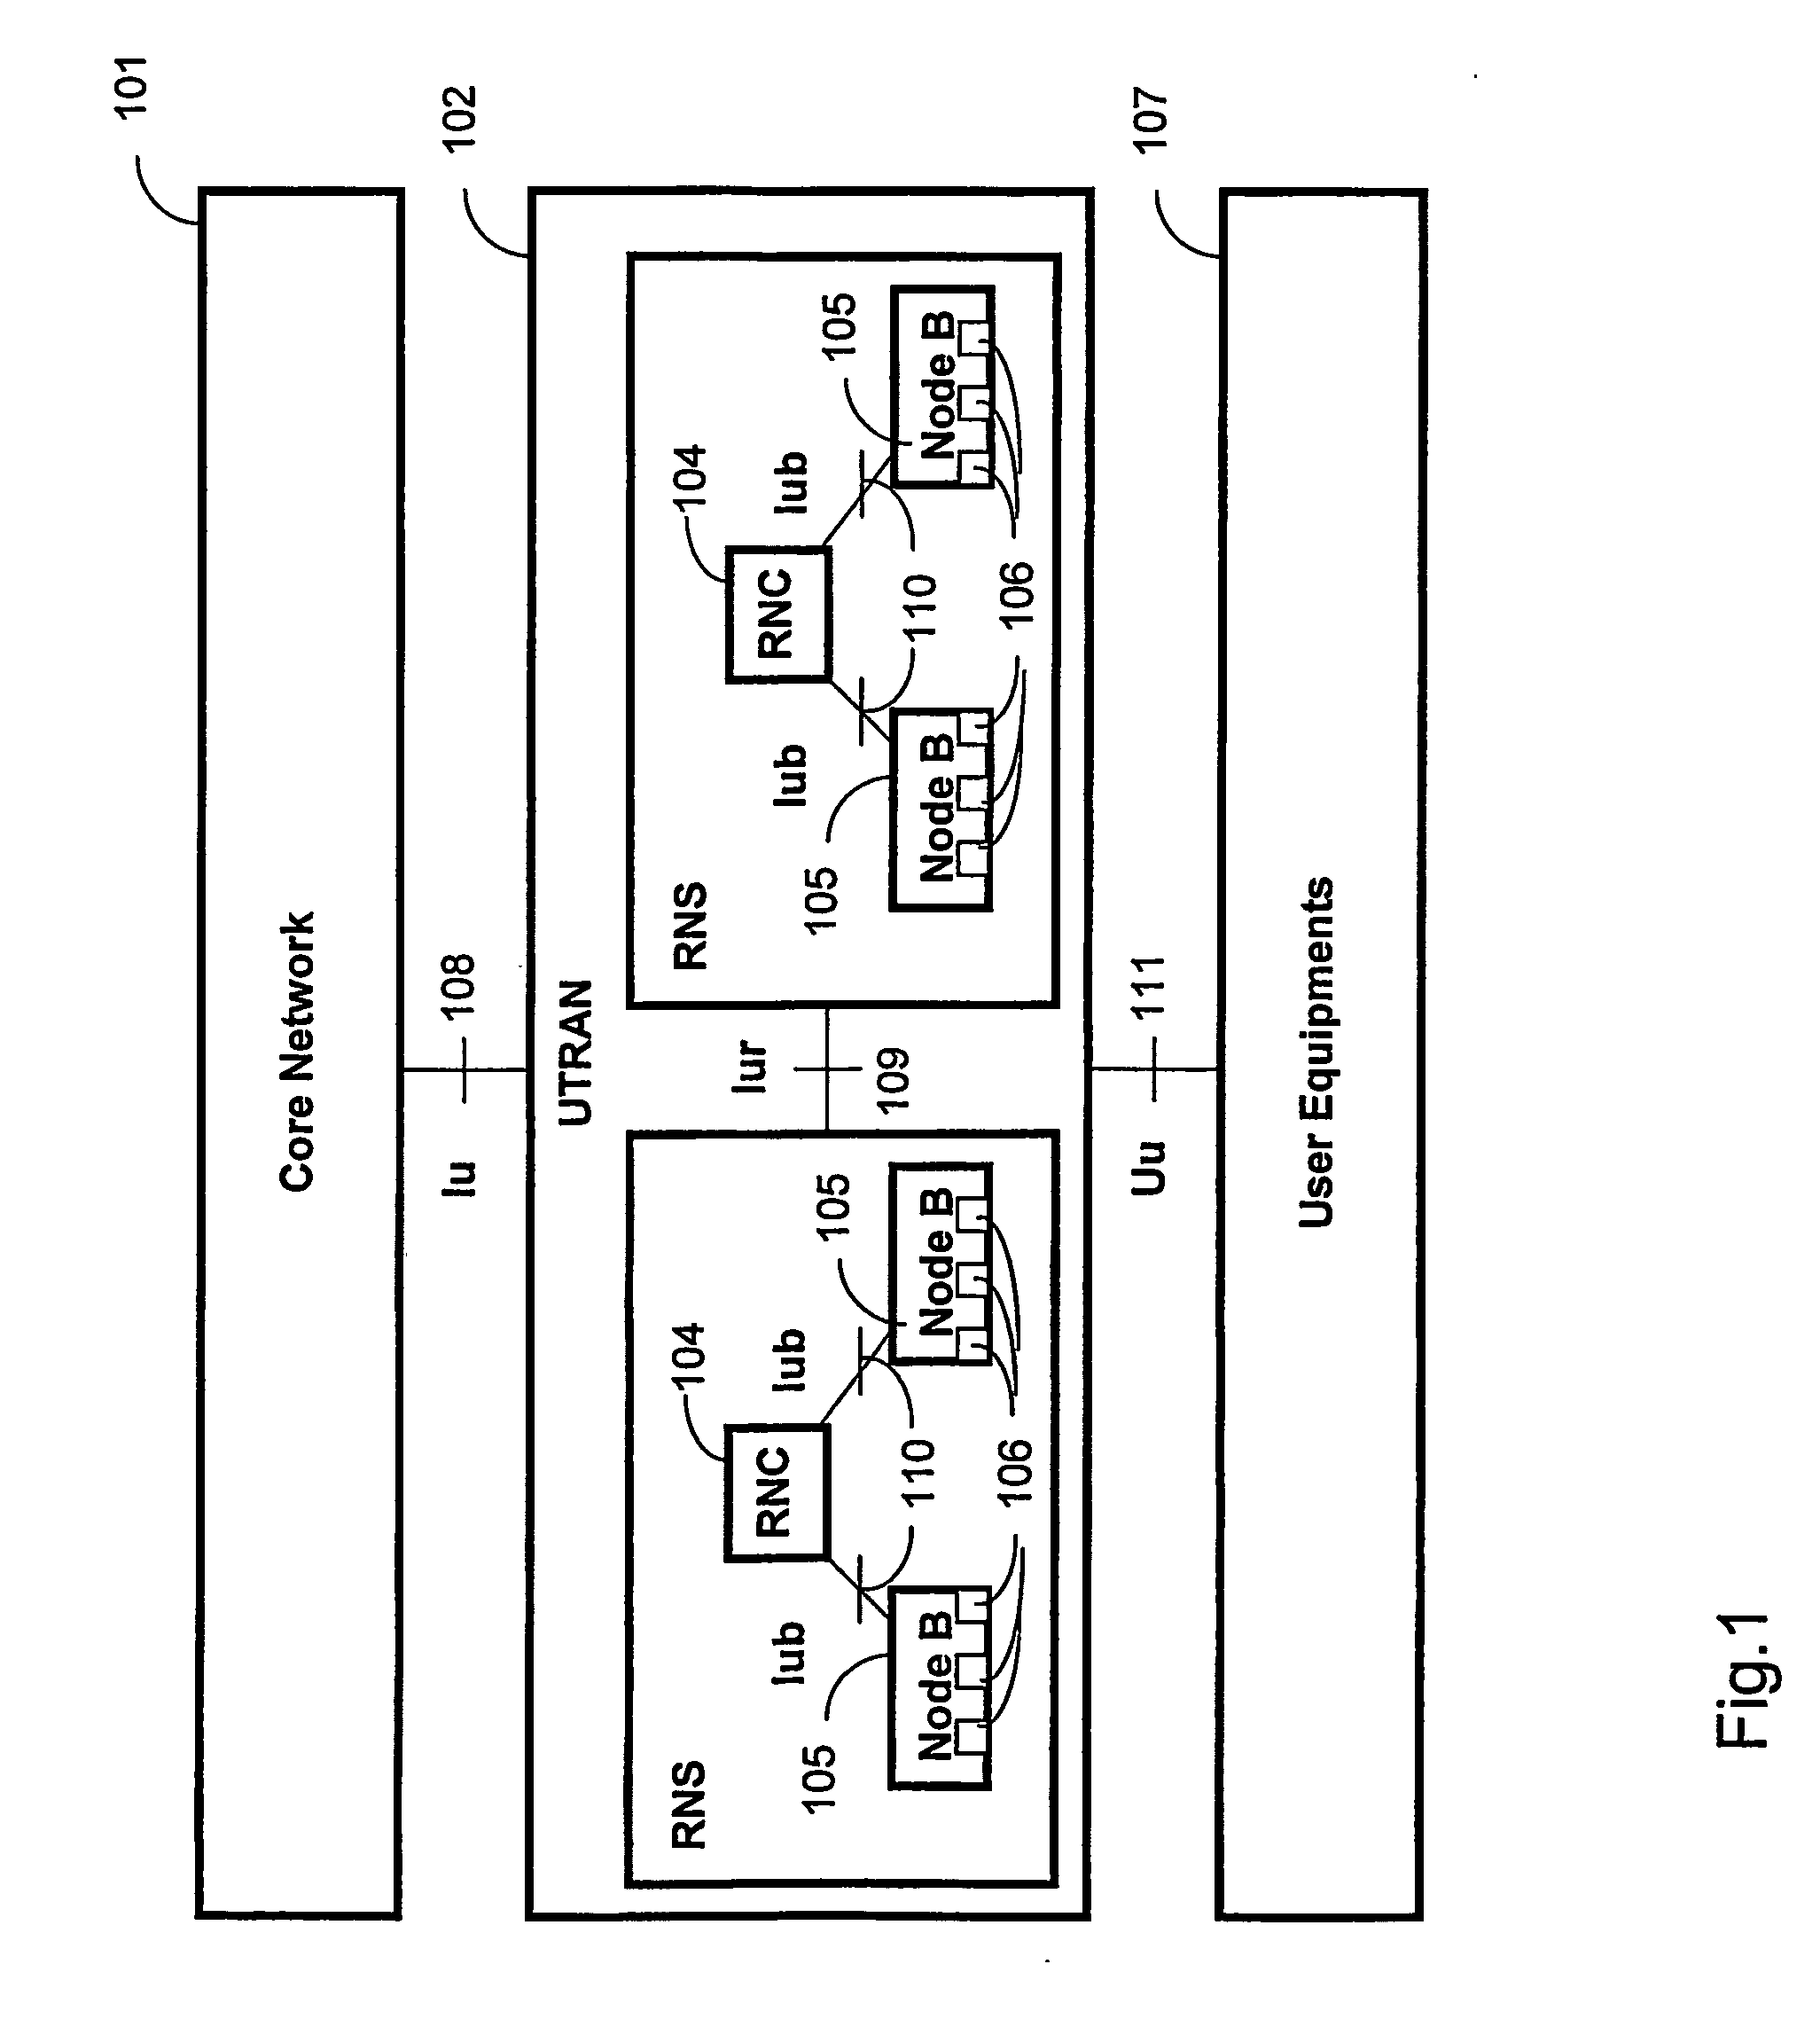 Method and an arrangement for transport layer control signalling in utran supporting both atm and ip transport technologies